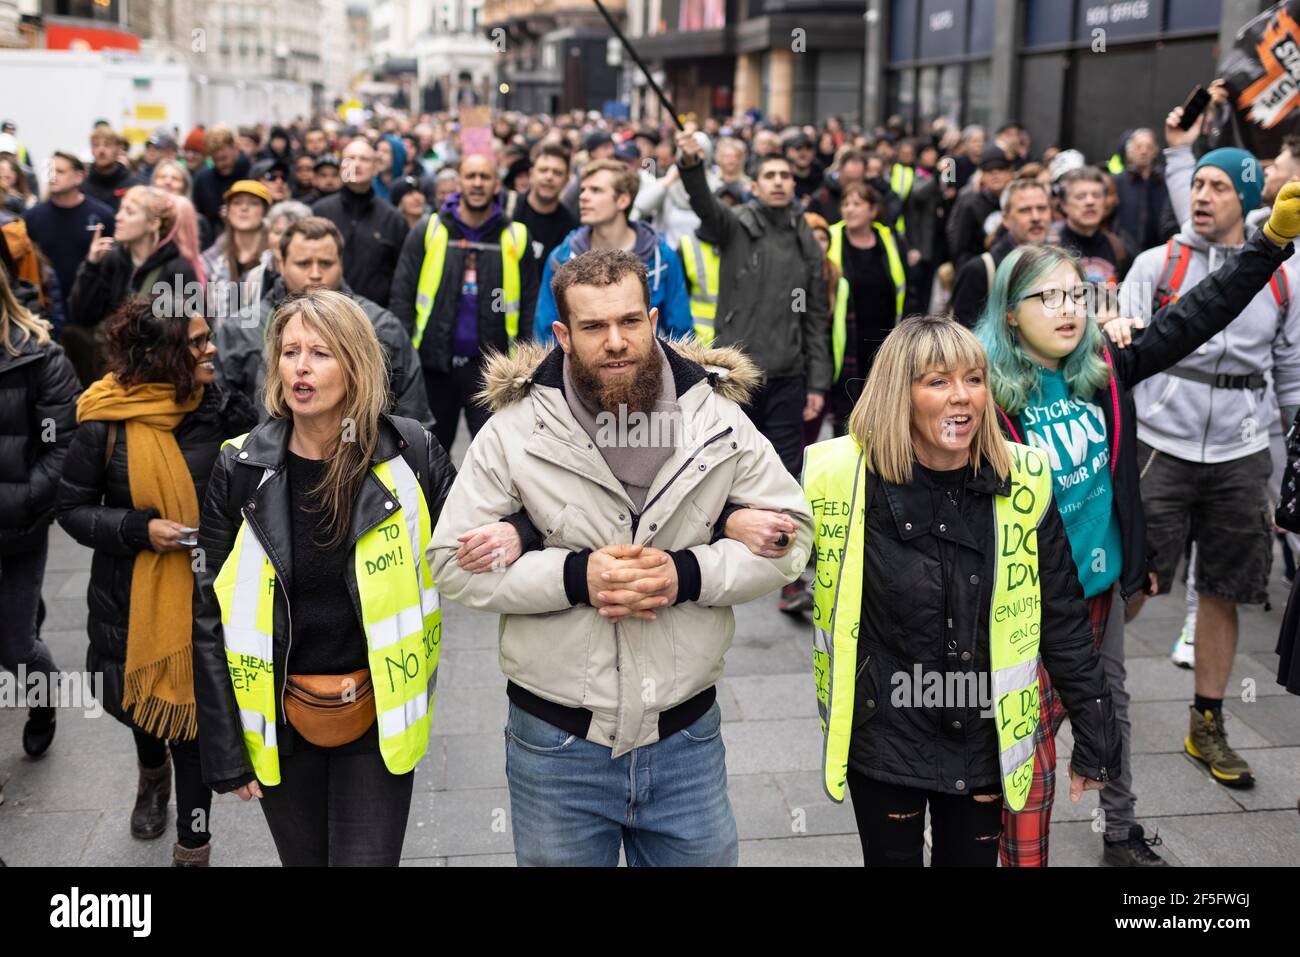 Anti-lockdown and anti Covid-19 vaccination protest, London, 20 March 2021. Protesters marching and locking arms. Stock Photo